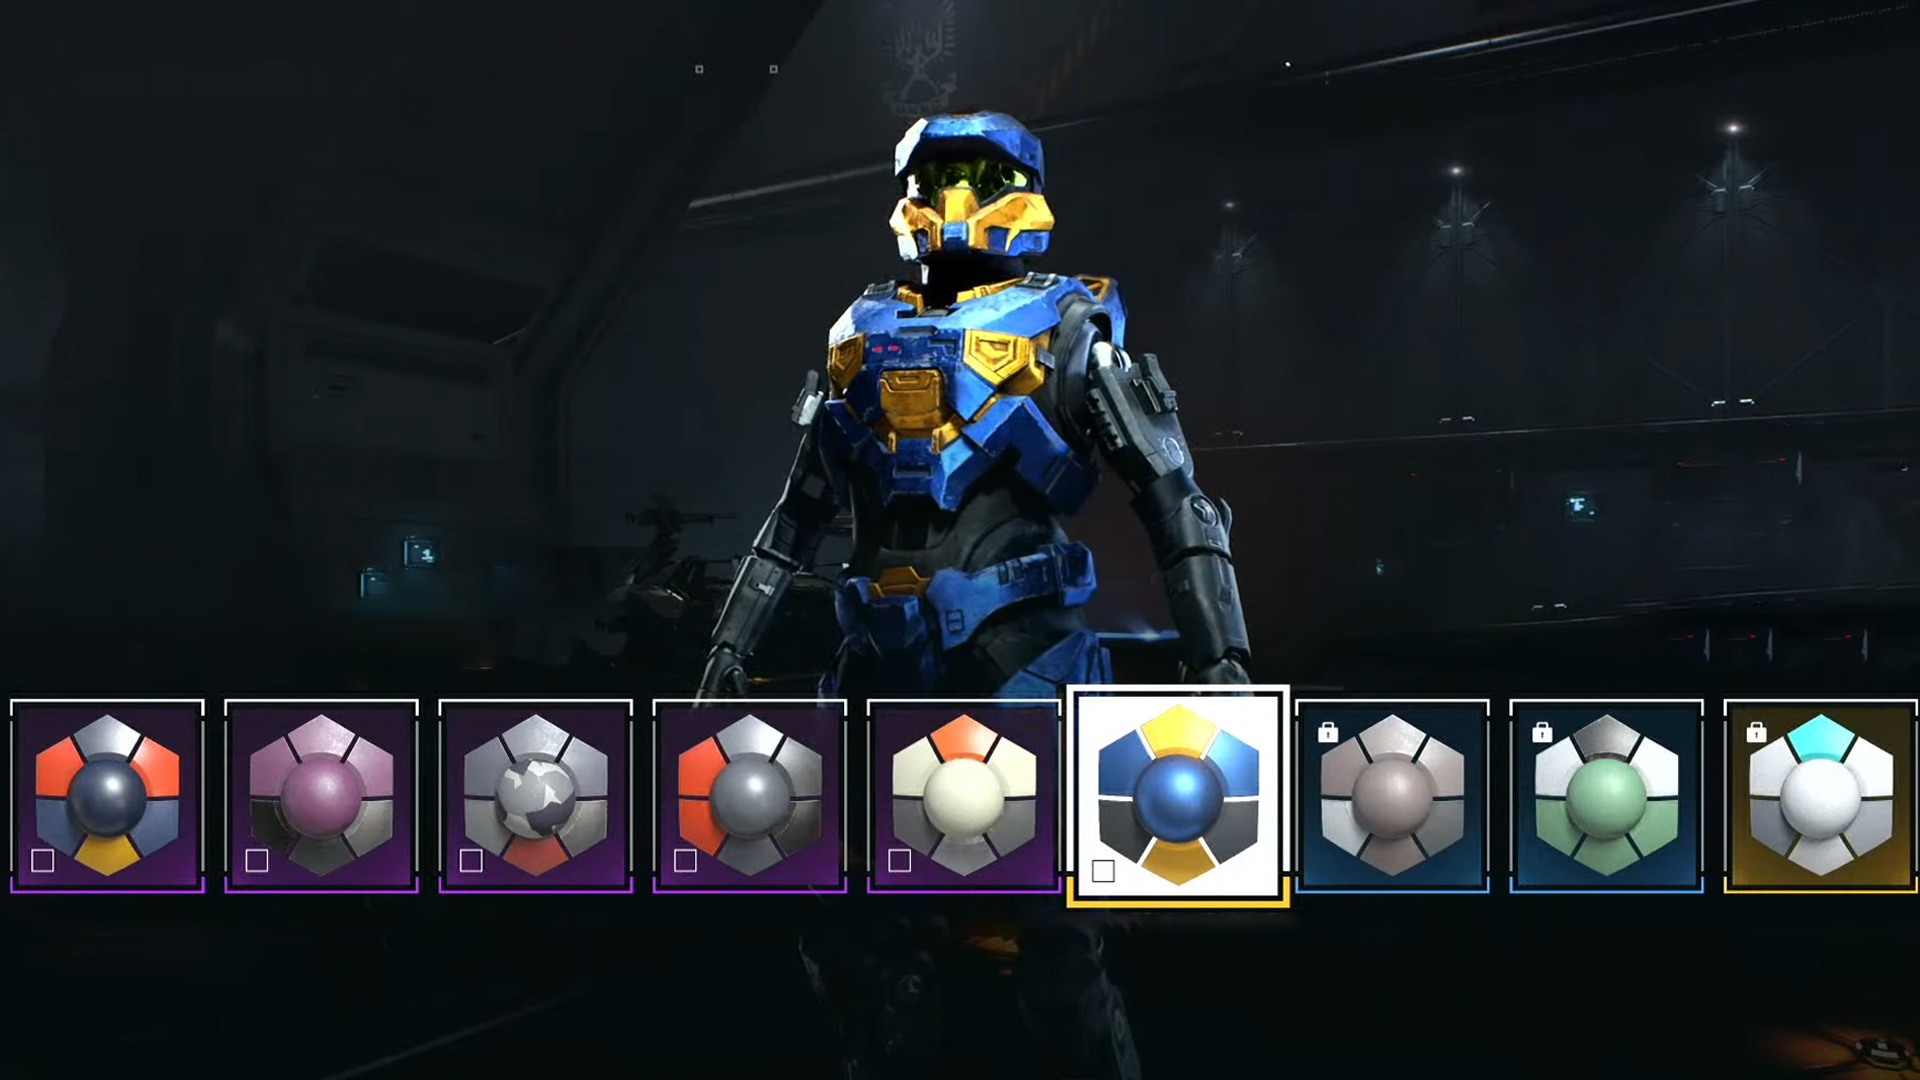 Halo Infinite – how to customise your Spartan armor